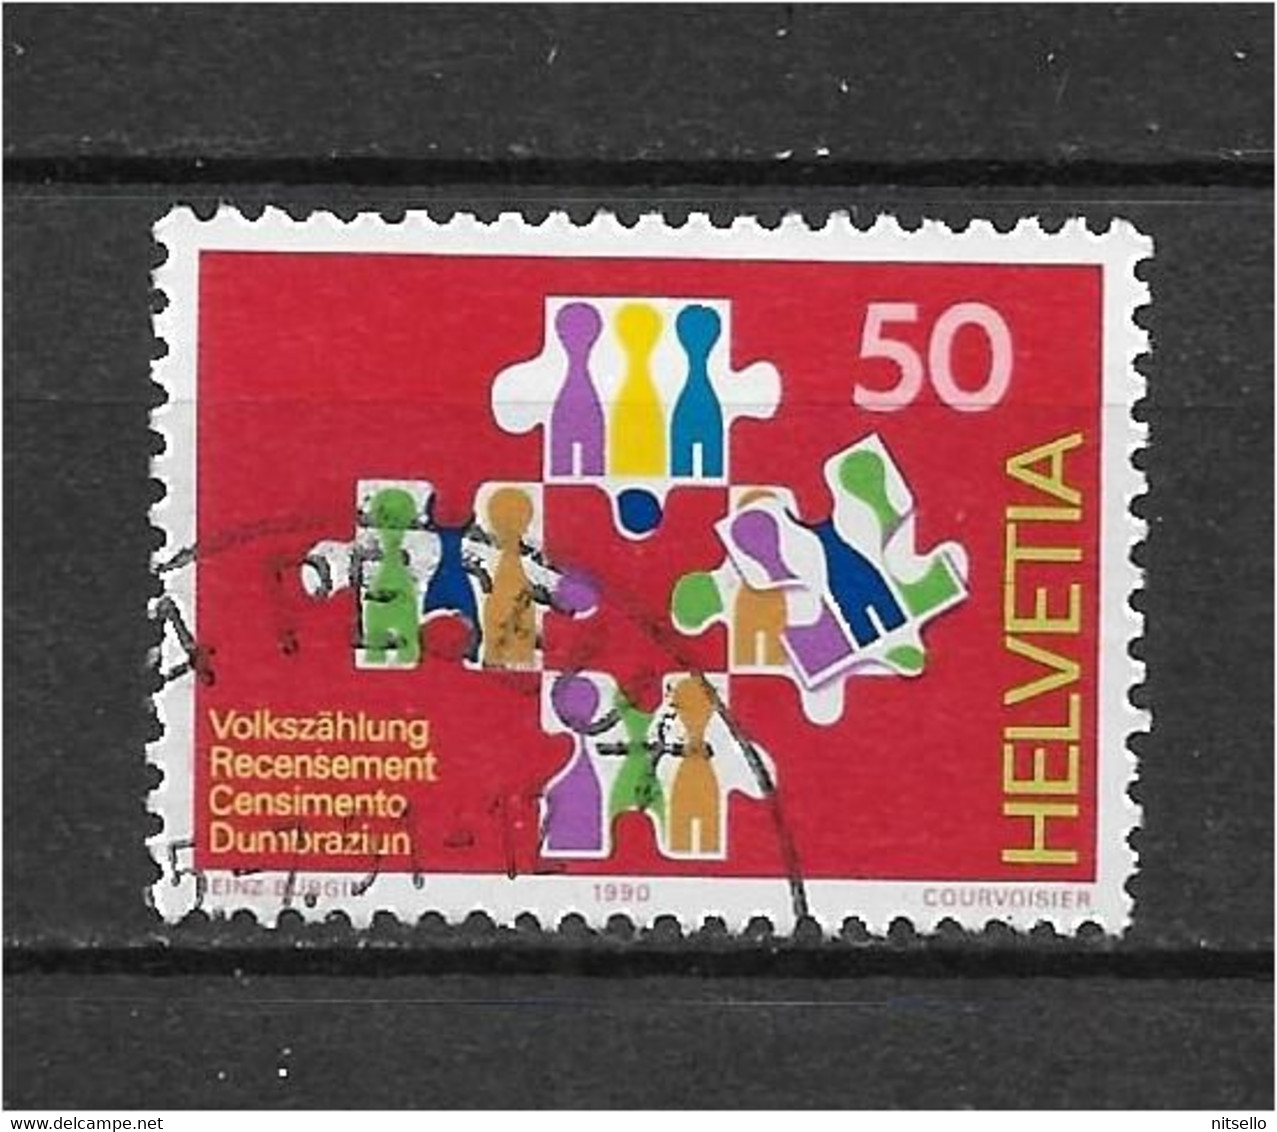 LOTE 1530A /// SUIZA YVERT Nº: 1363  ¡¡¡ OFERTA - LIQUIDATION - JE LIQUIDE !!! - Used Stamps